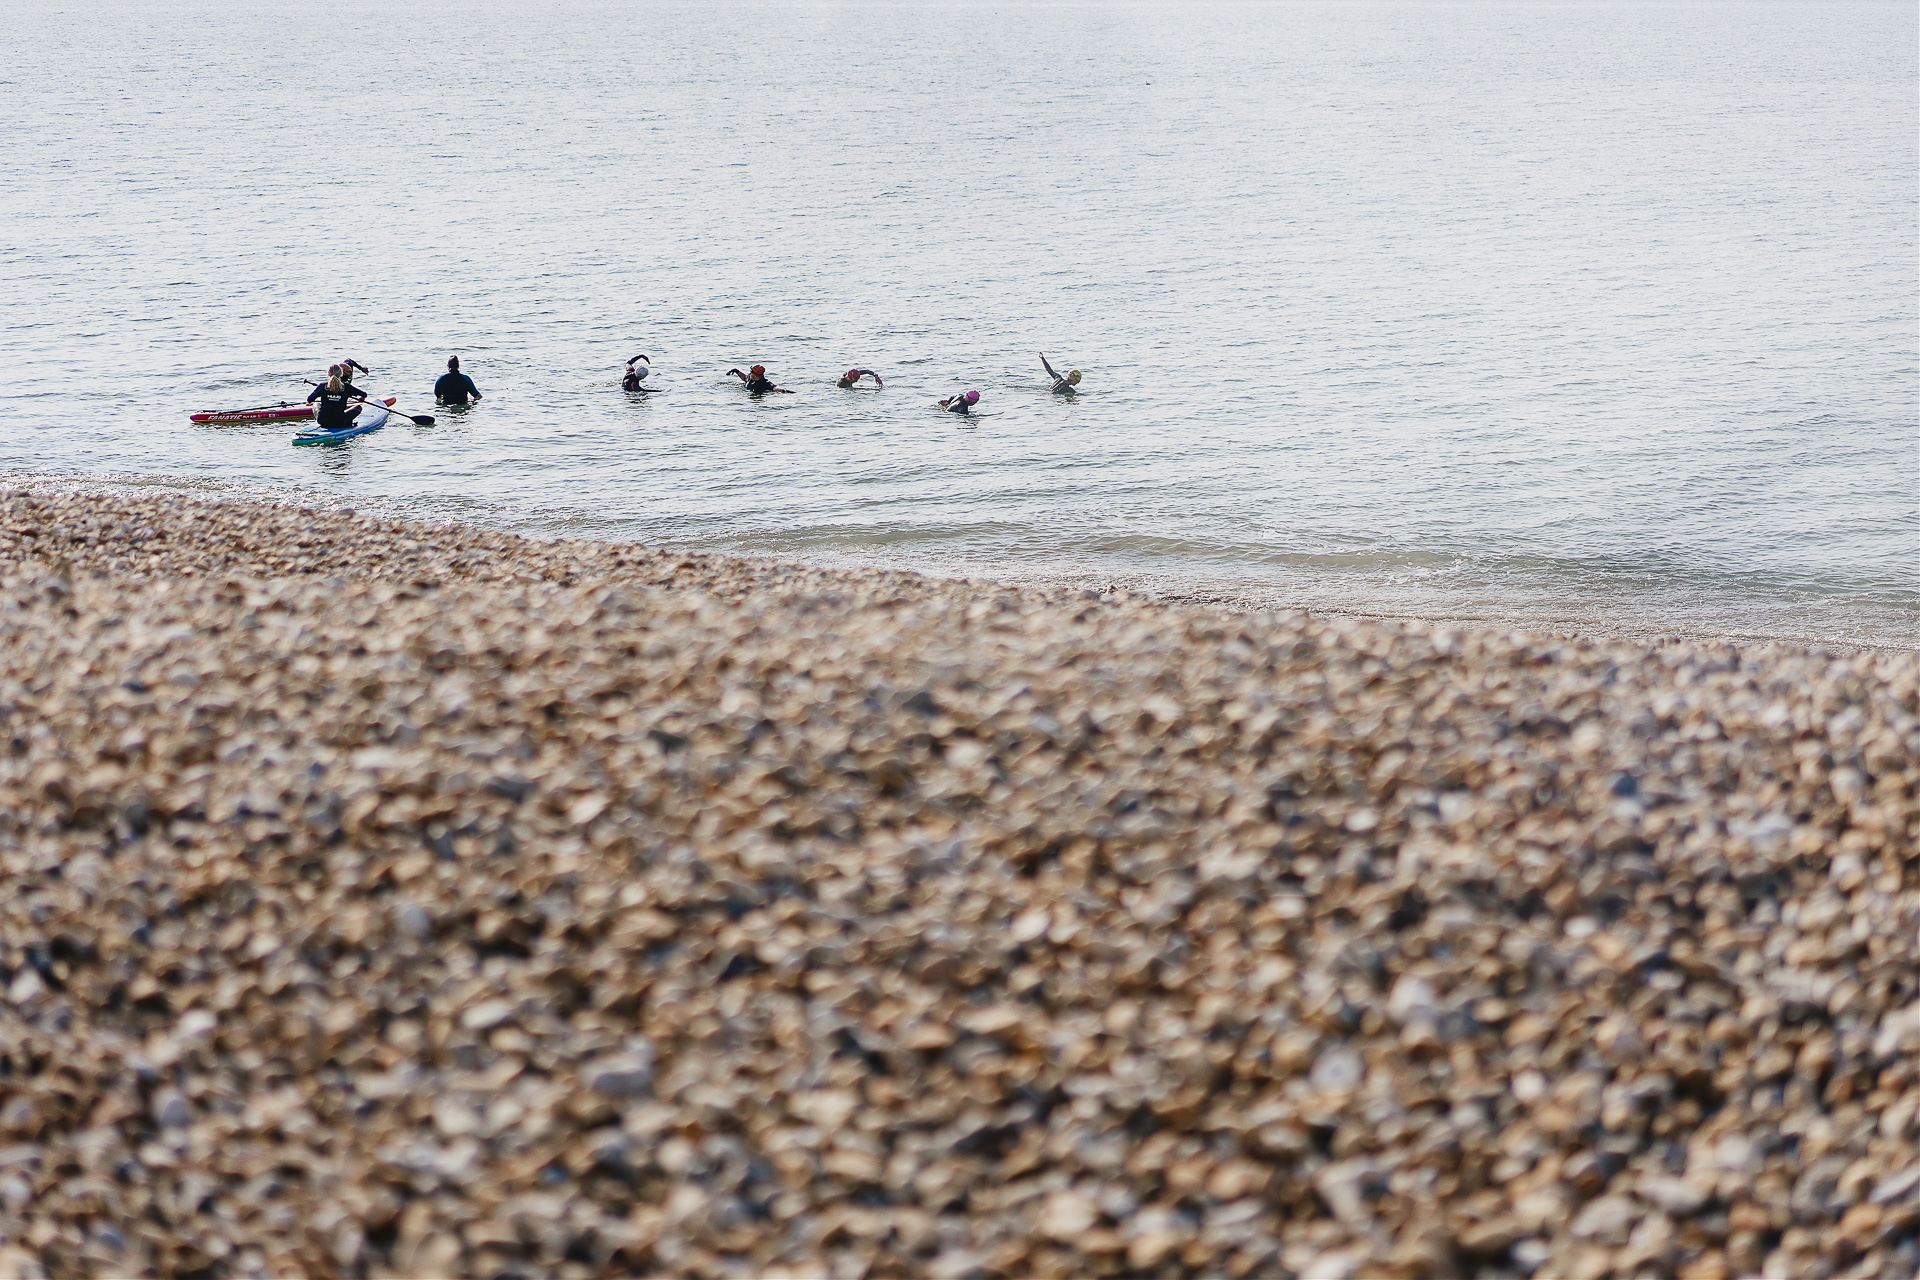 Sea swimmers in the water at Lyme Regis beach